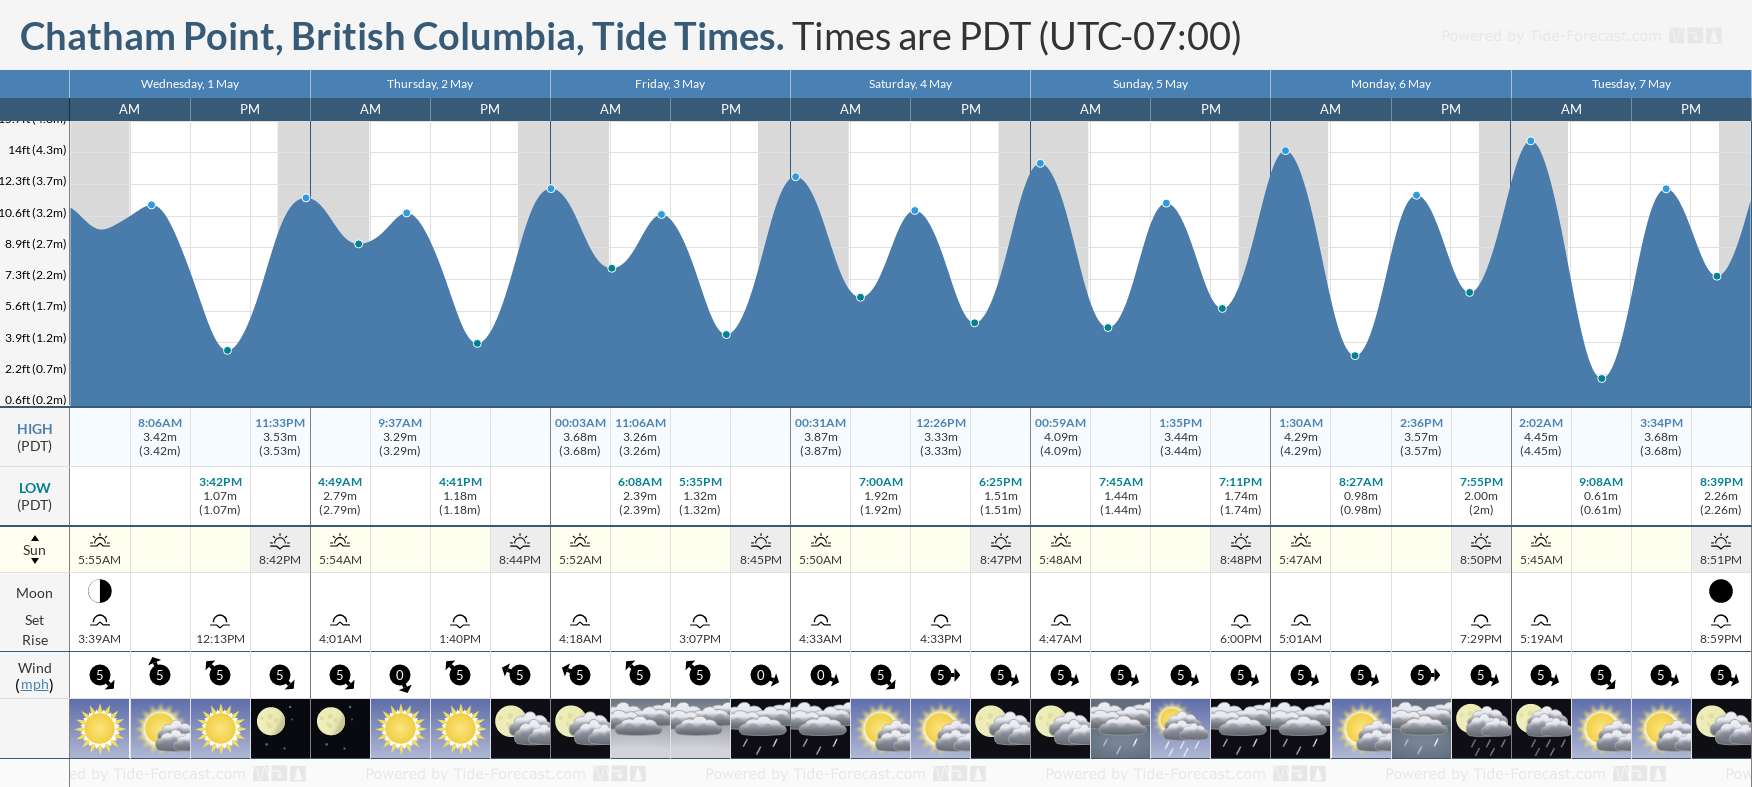 Chatham Point, British Columbia Tide Chart including high and low tide tide times for the next 7 days